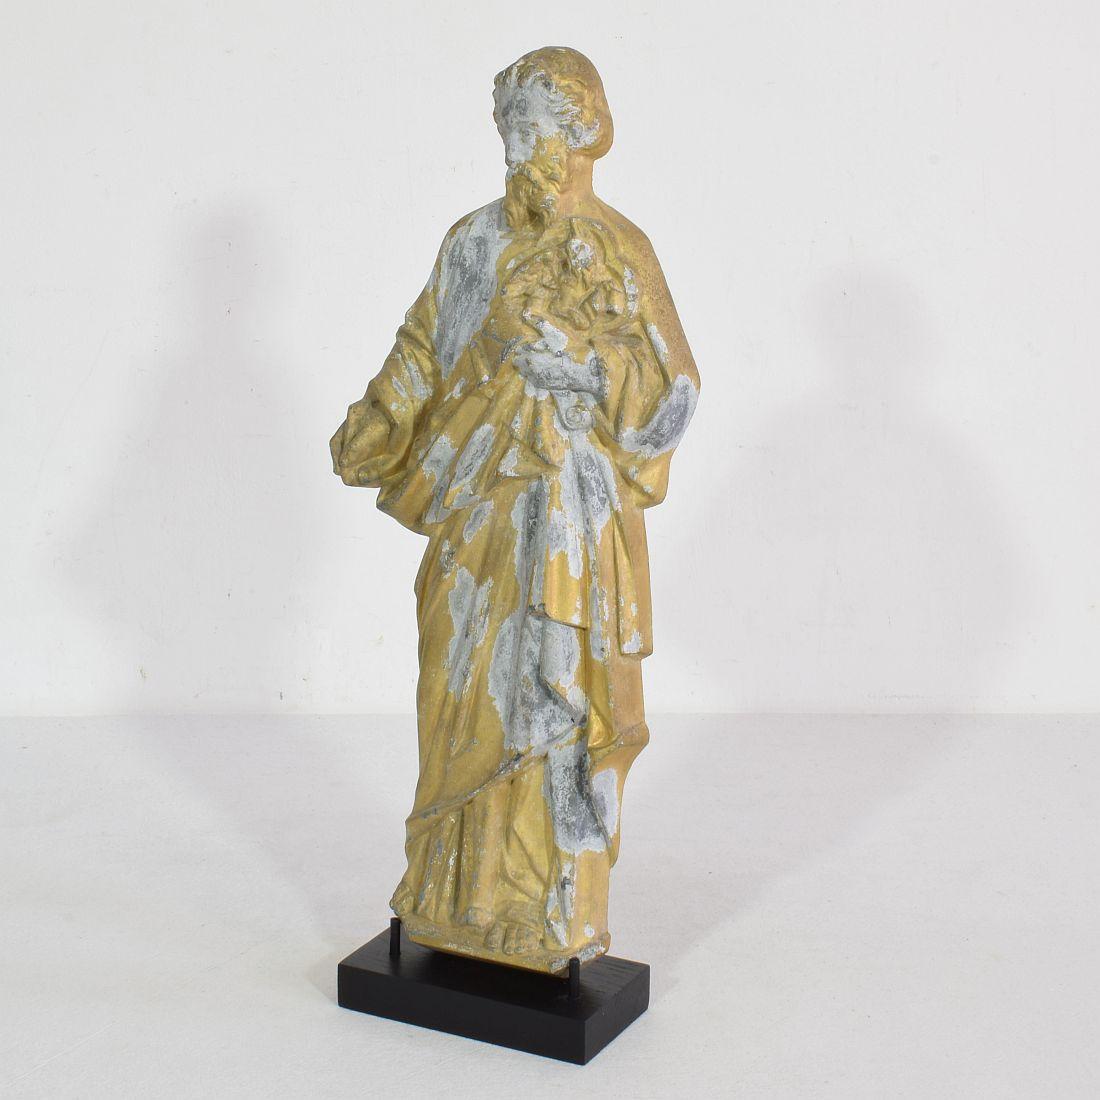 Wonderful gilded metal saint statue with beautiful expression.
France, circa 1880-1900.
Weathered. Measurements include the wooden base.